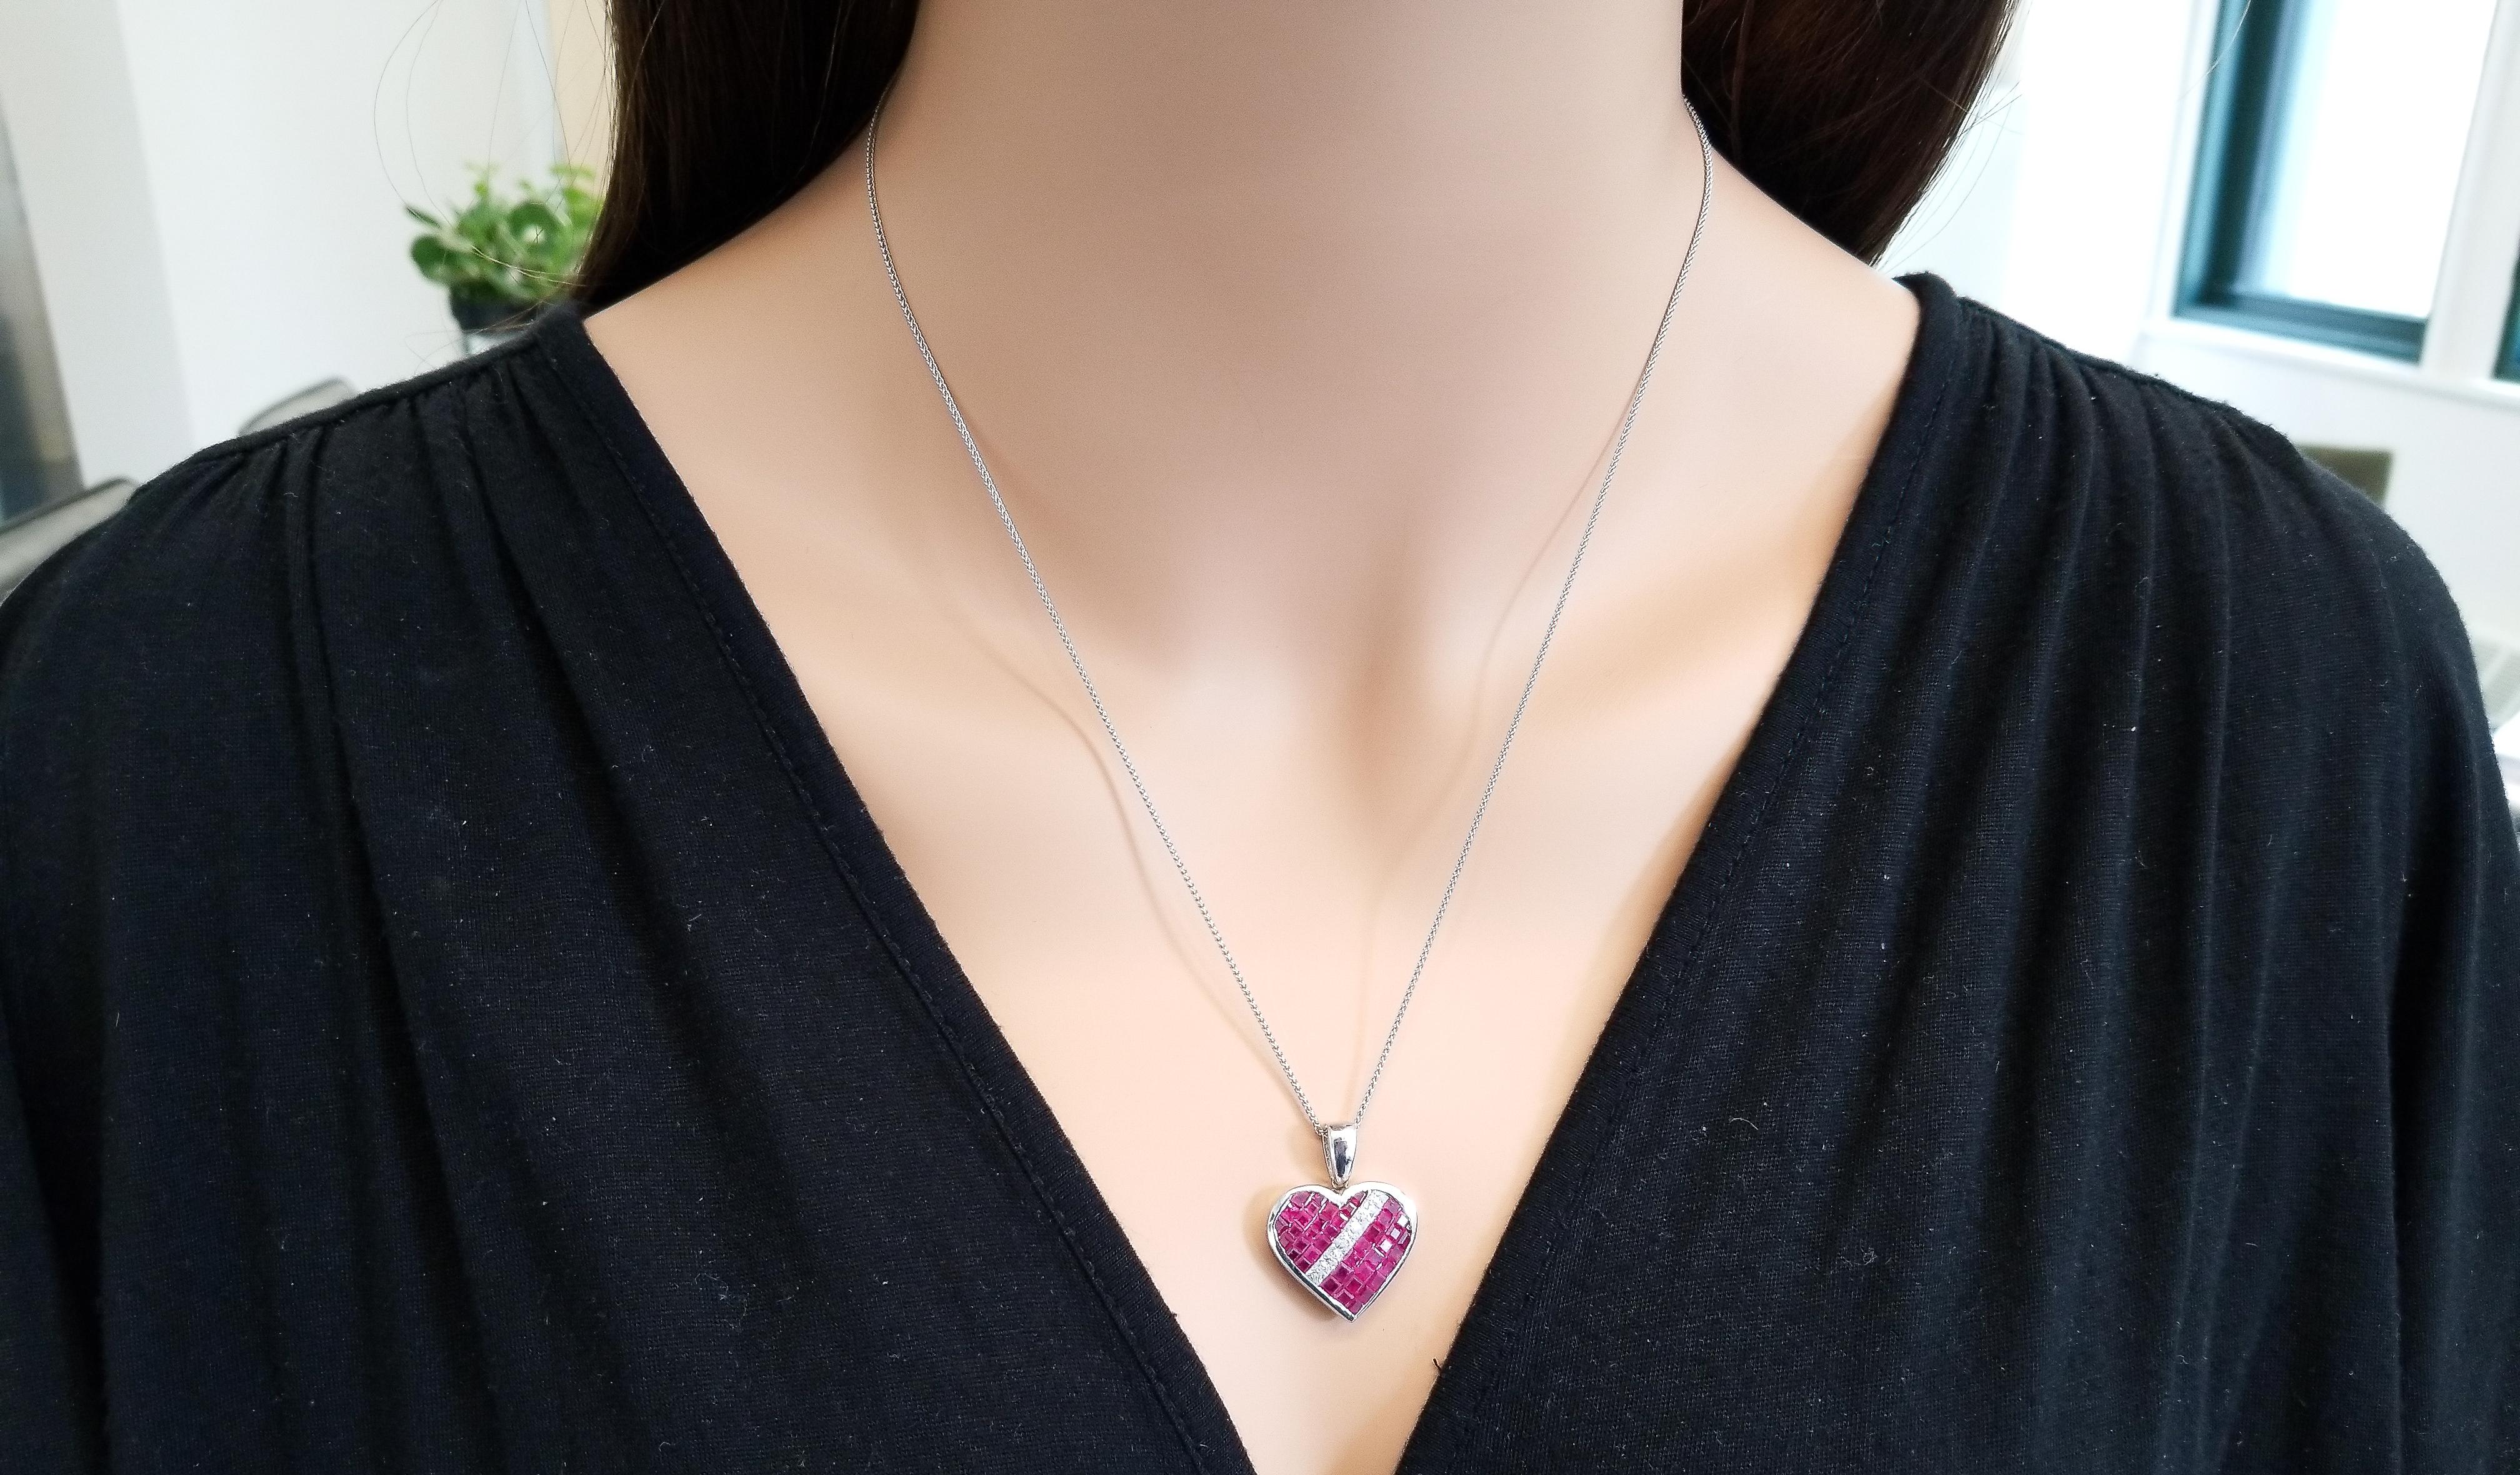 When you present this gorgeous ruby and diamond heart pendant to your favorite lady, she will be completely thrilled! This heart pendant includes 3.24 carat total of juicy red princess cut Thai rubies, with a diagonal row of 0.46 carat total